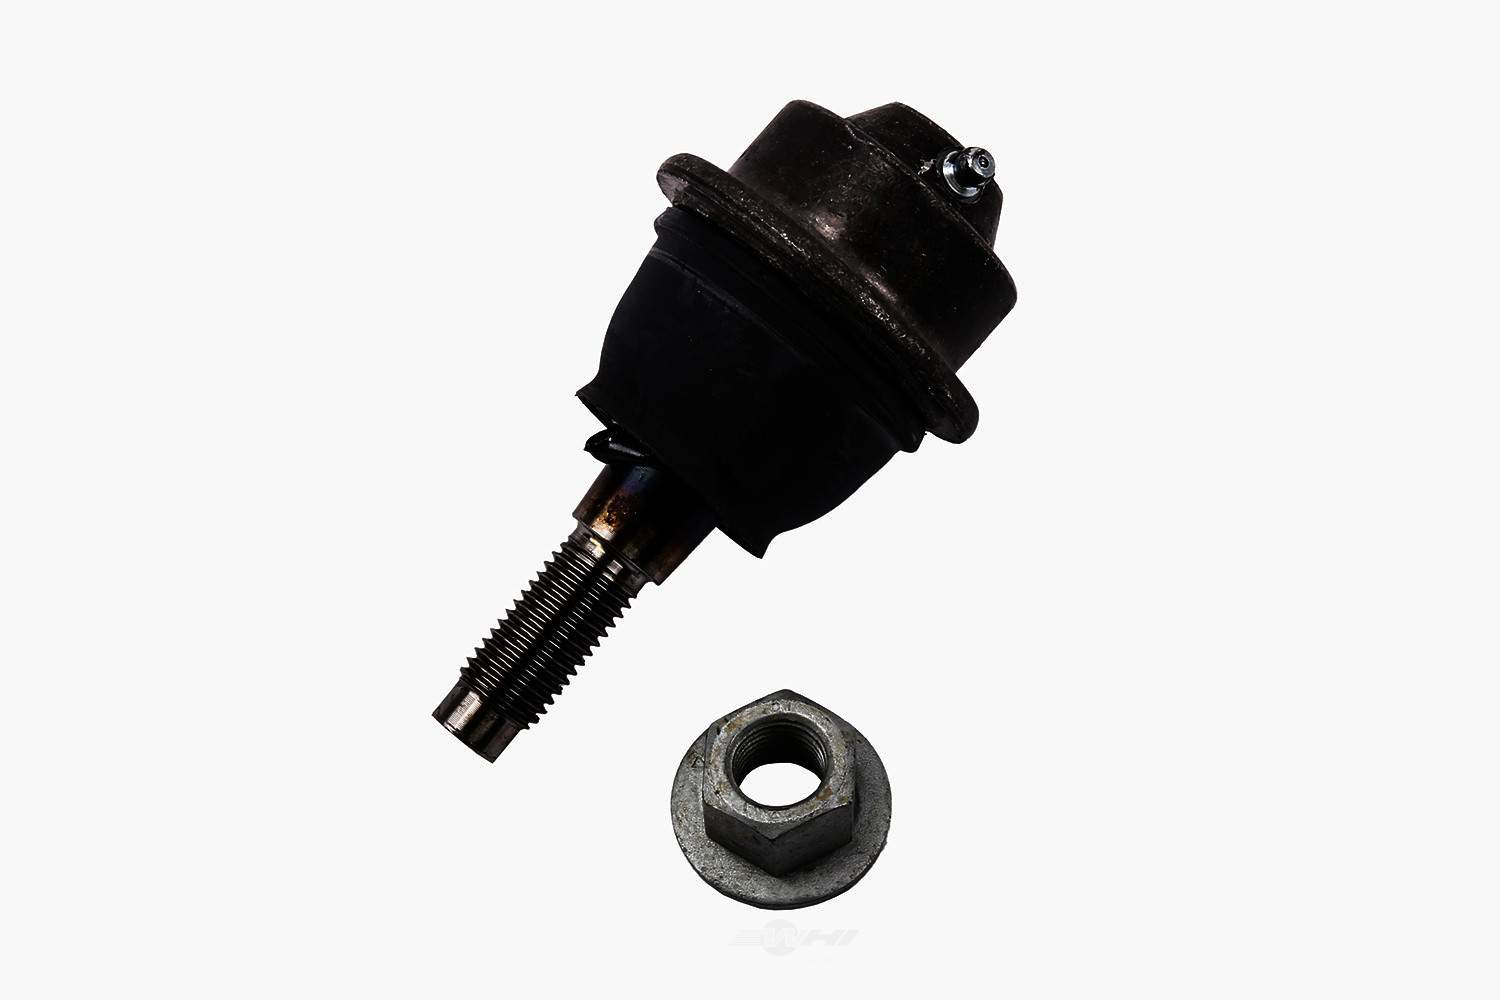 GM GENUINE PARTS CANADA - Suspension Ball Joint Kit - GMC 19207137